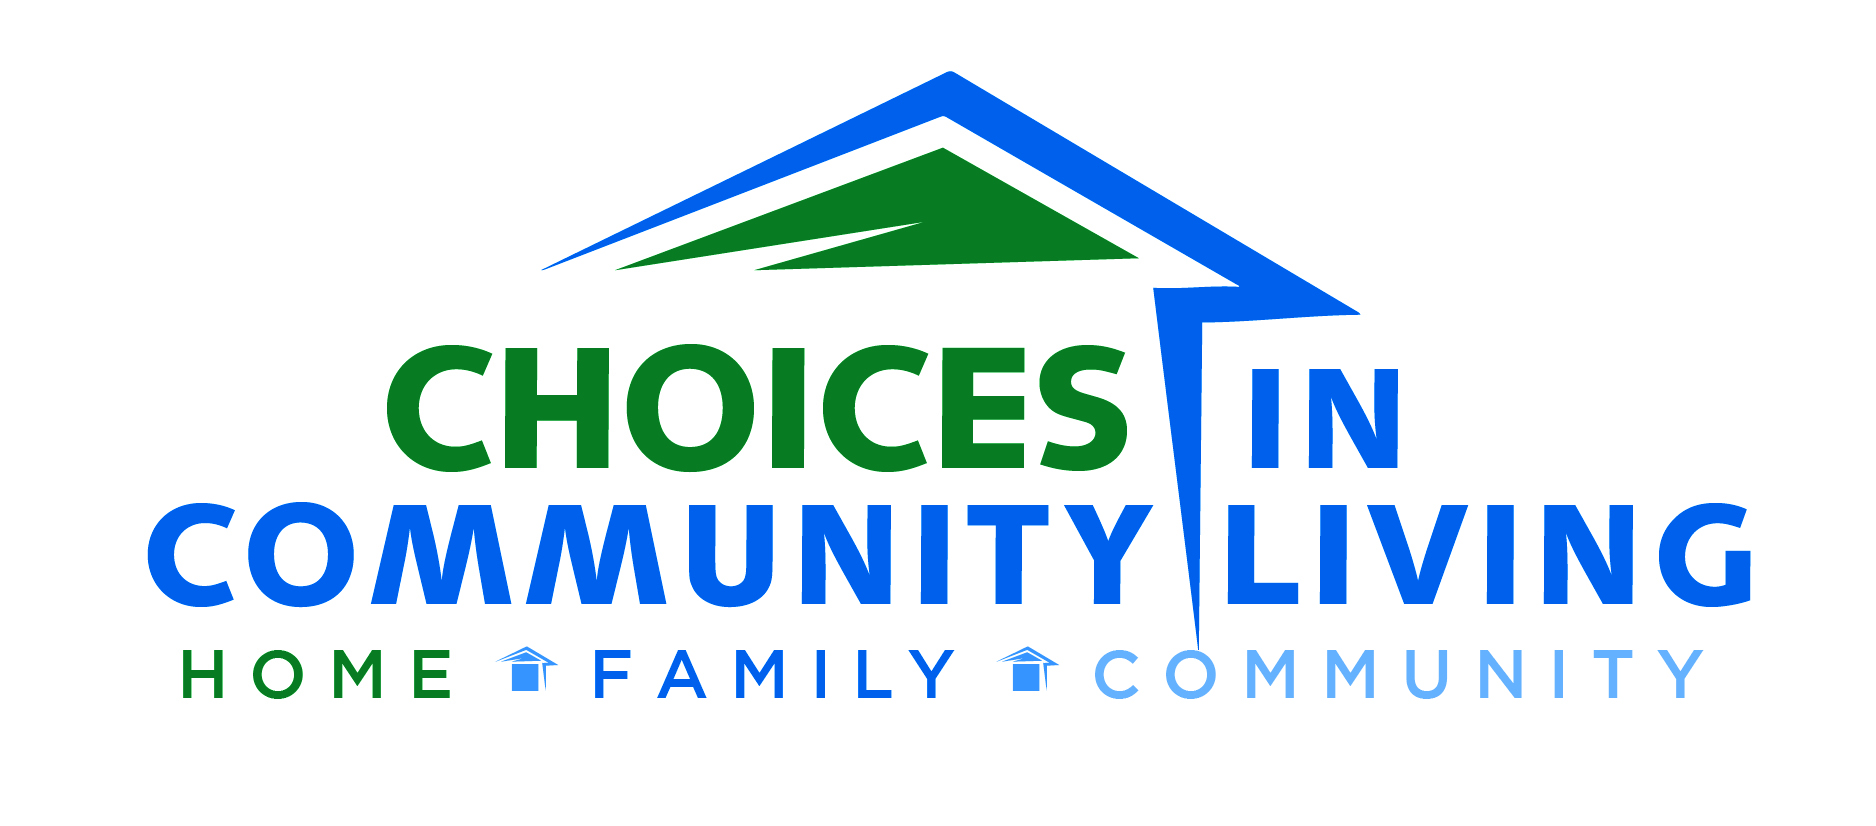 Choices in Community Living